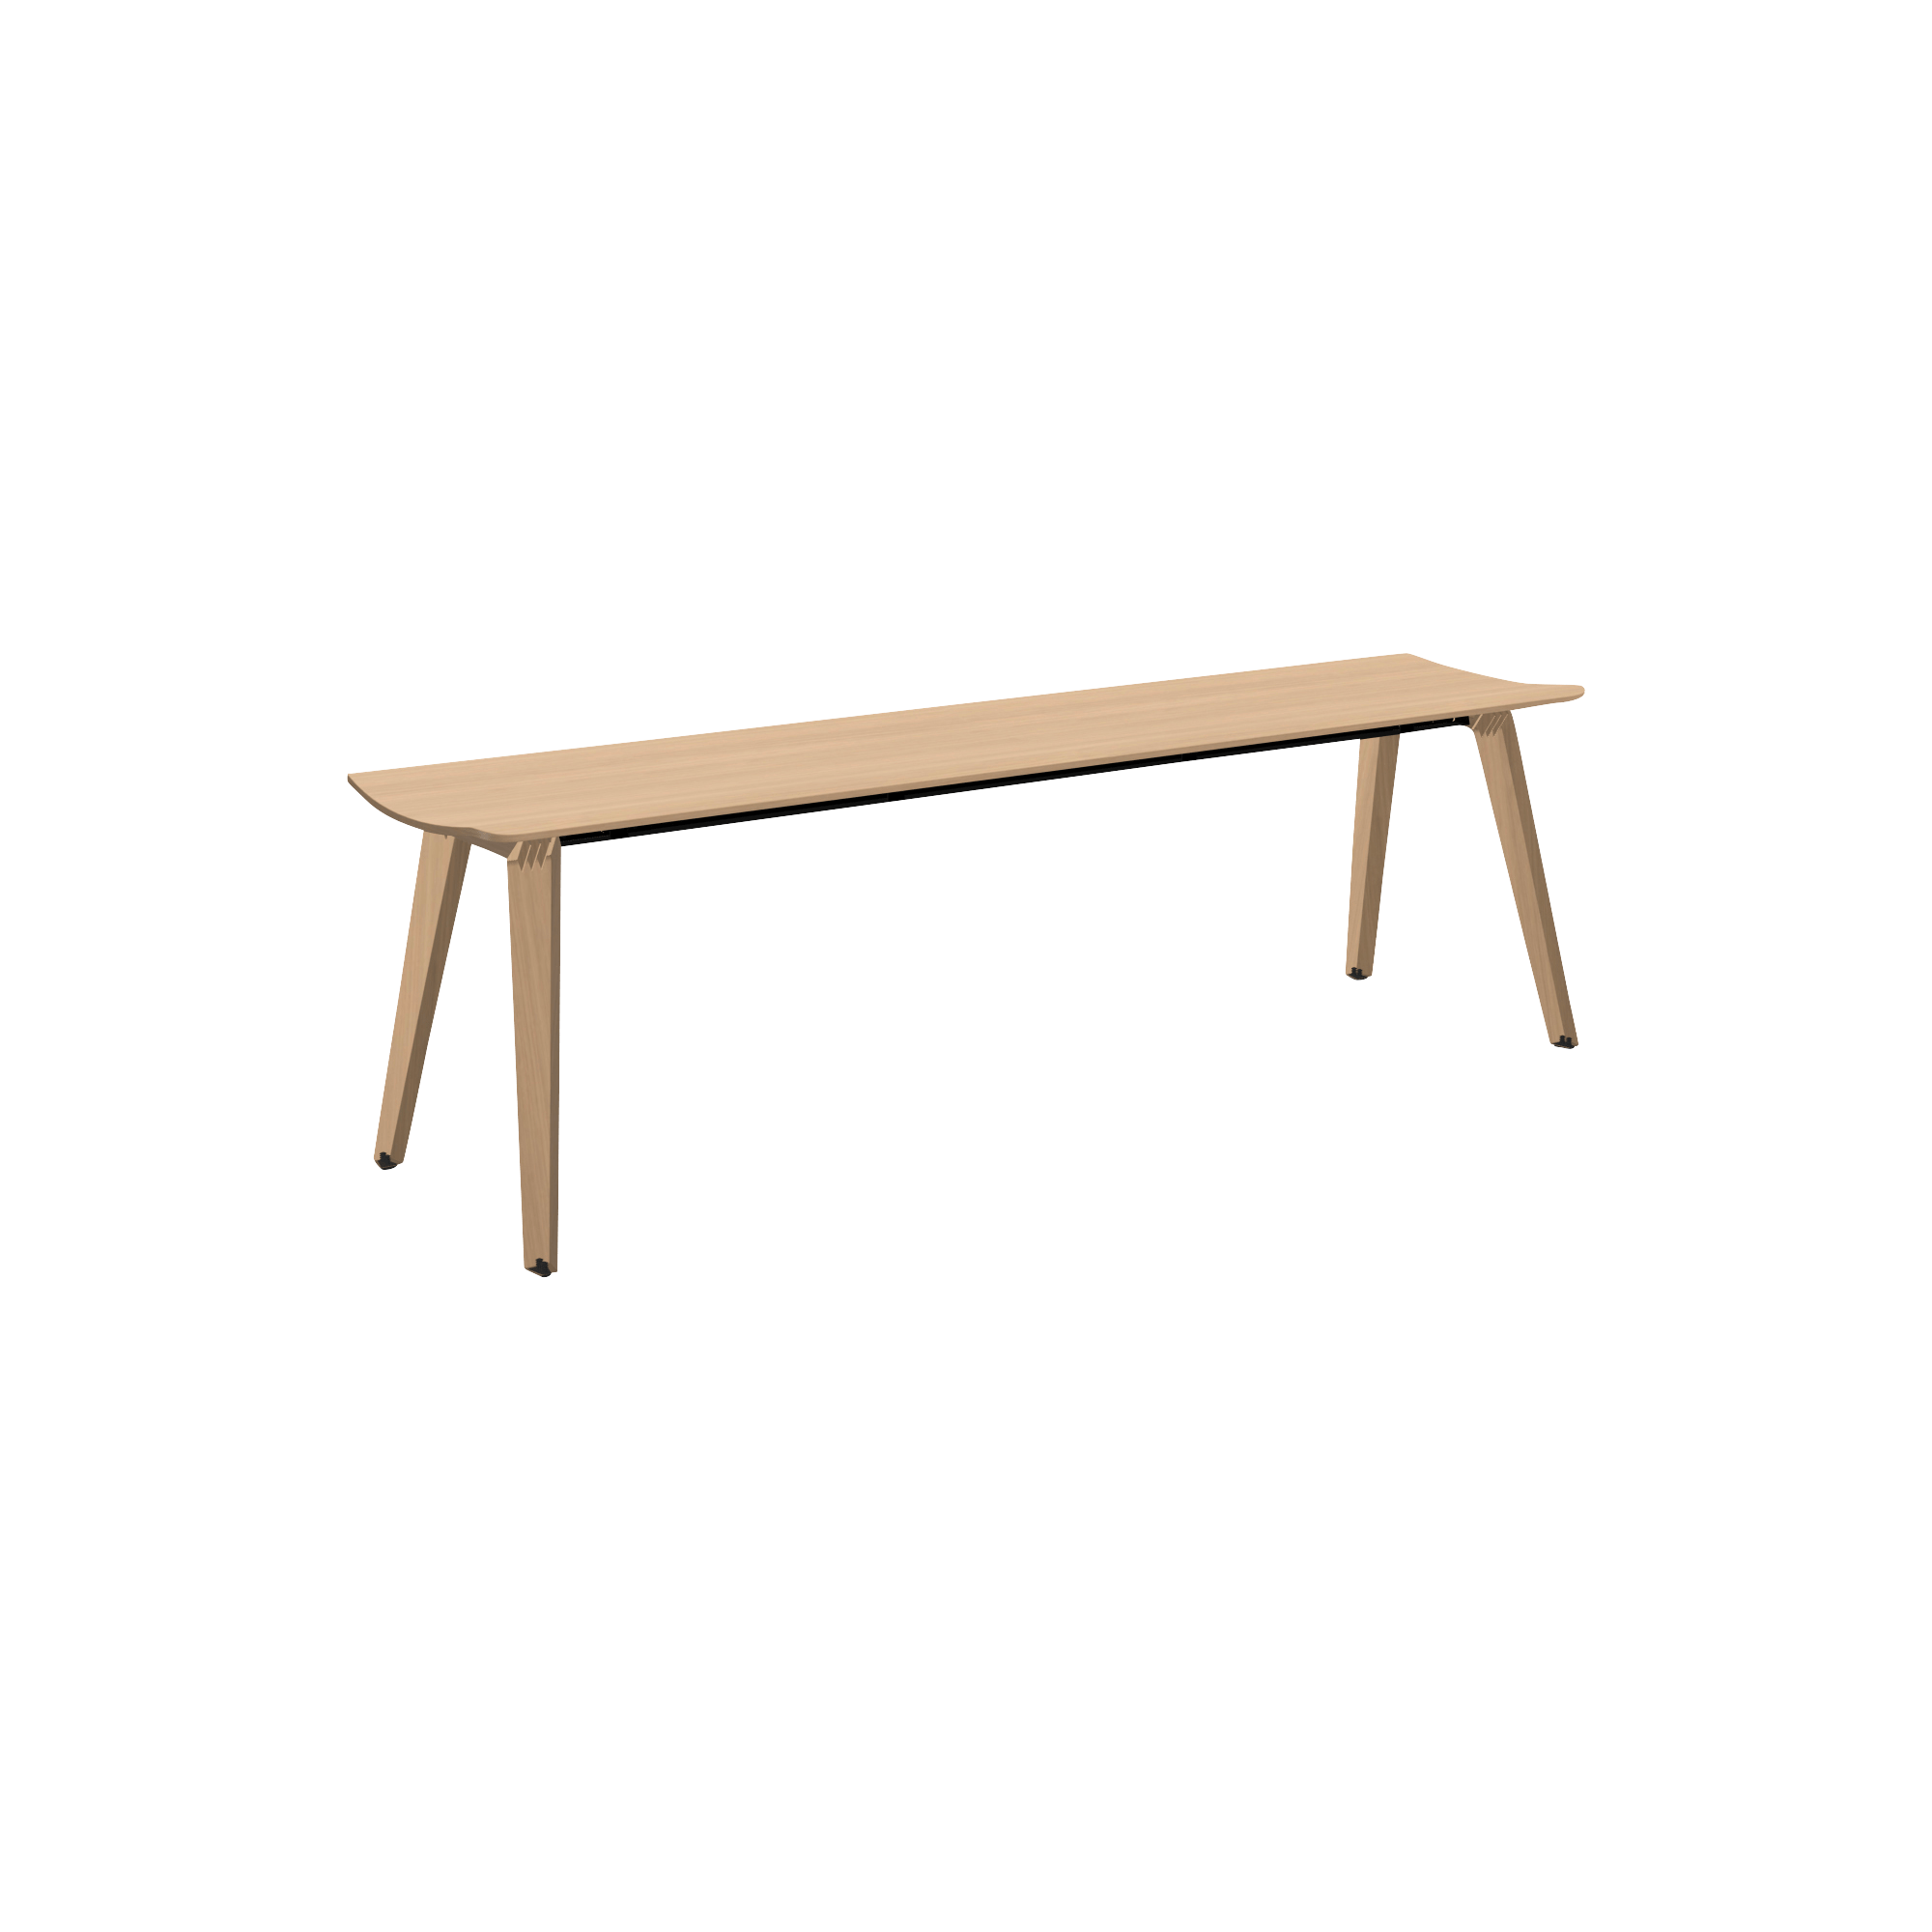 wooden bench with wooden legs